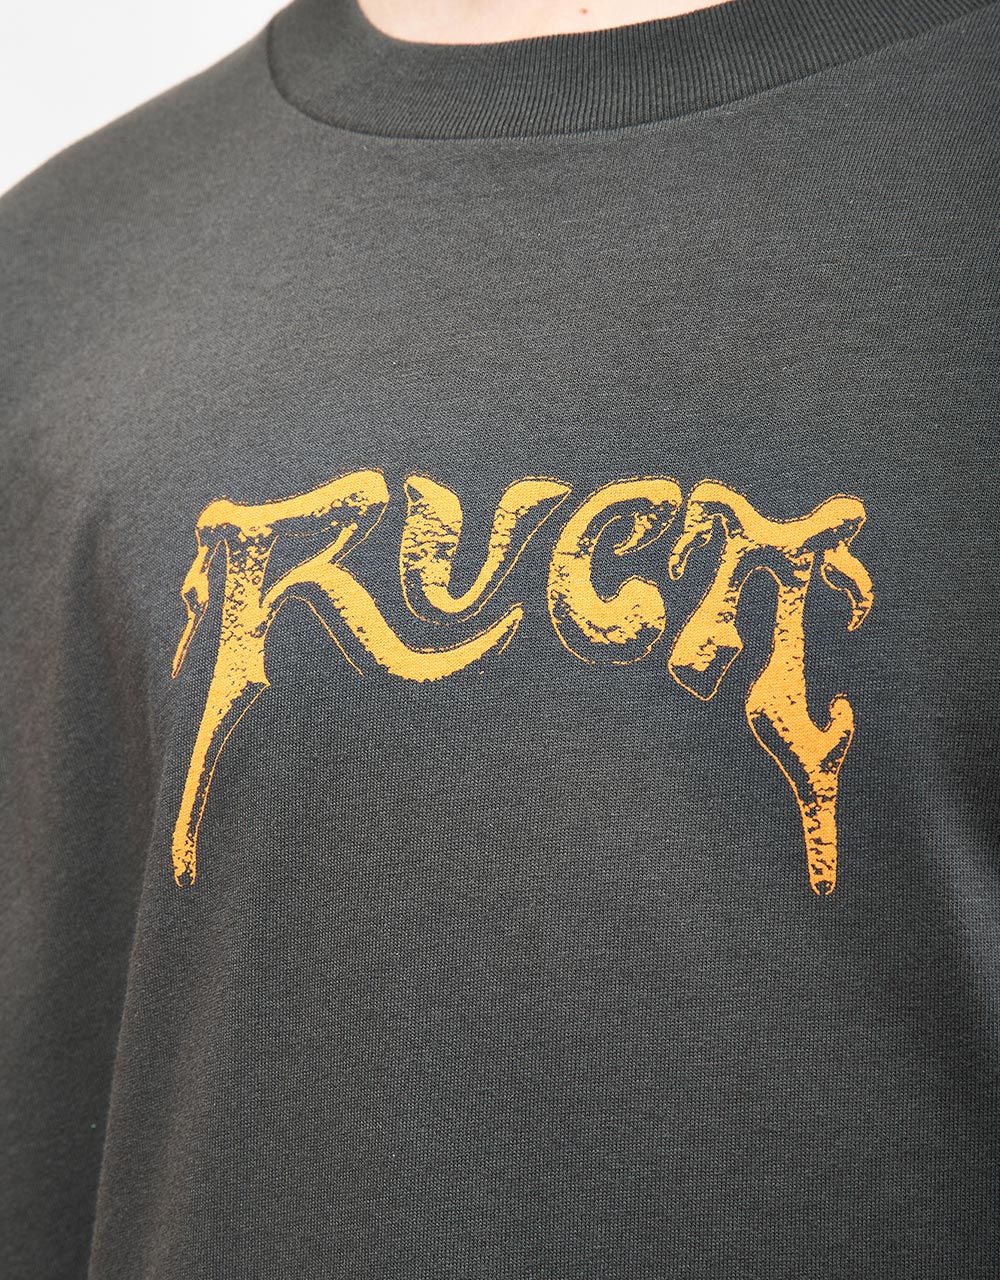 RVCA Unearthed T-Shirt - Pirate Black